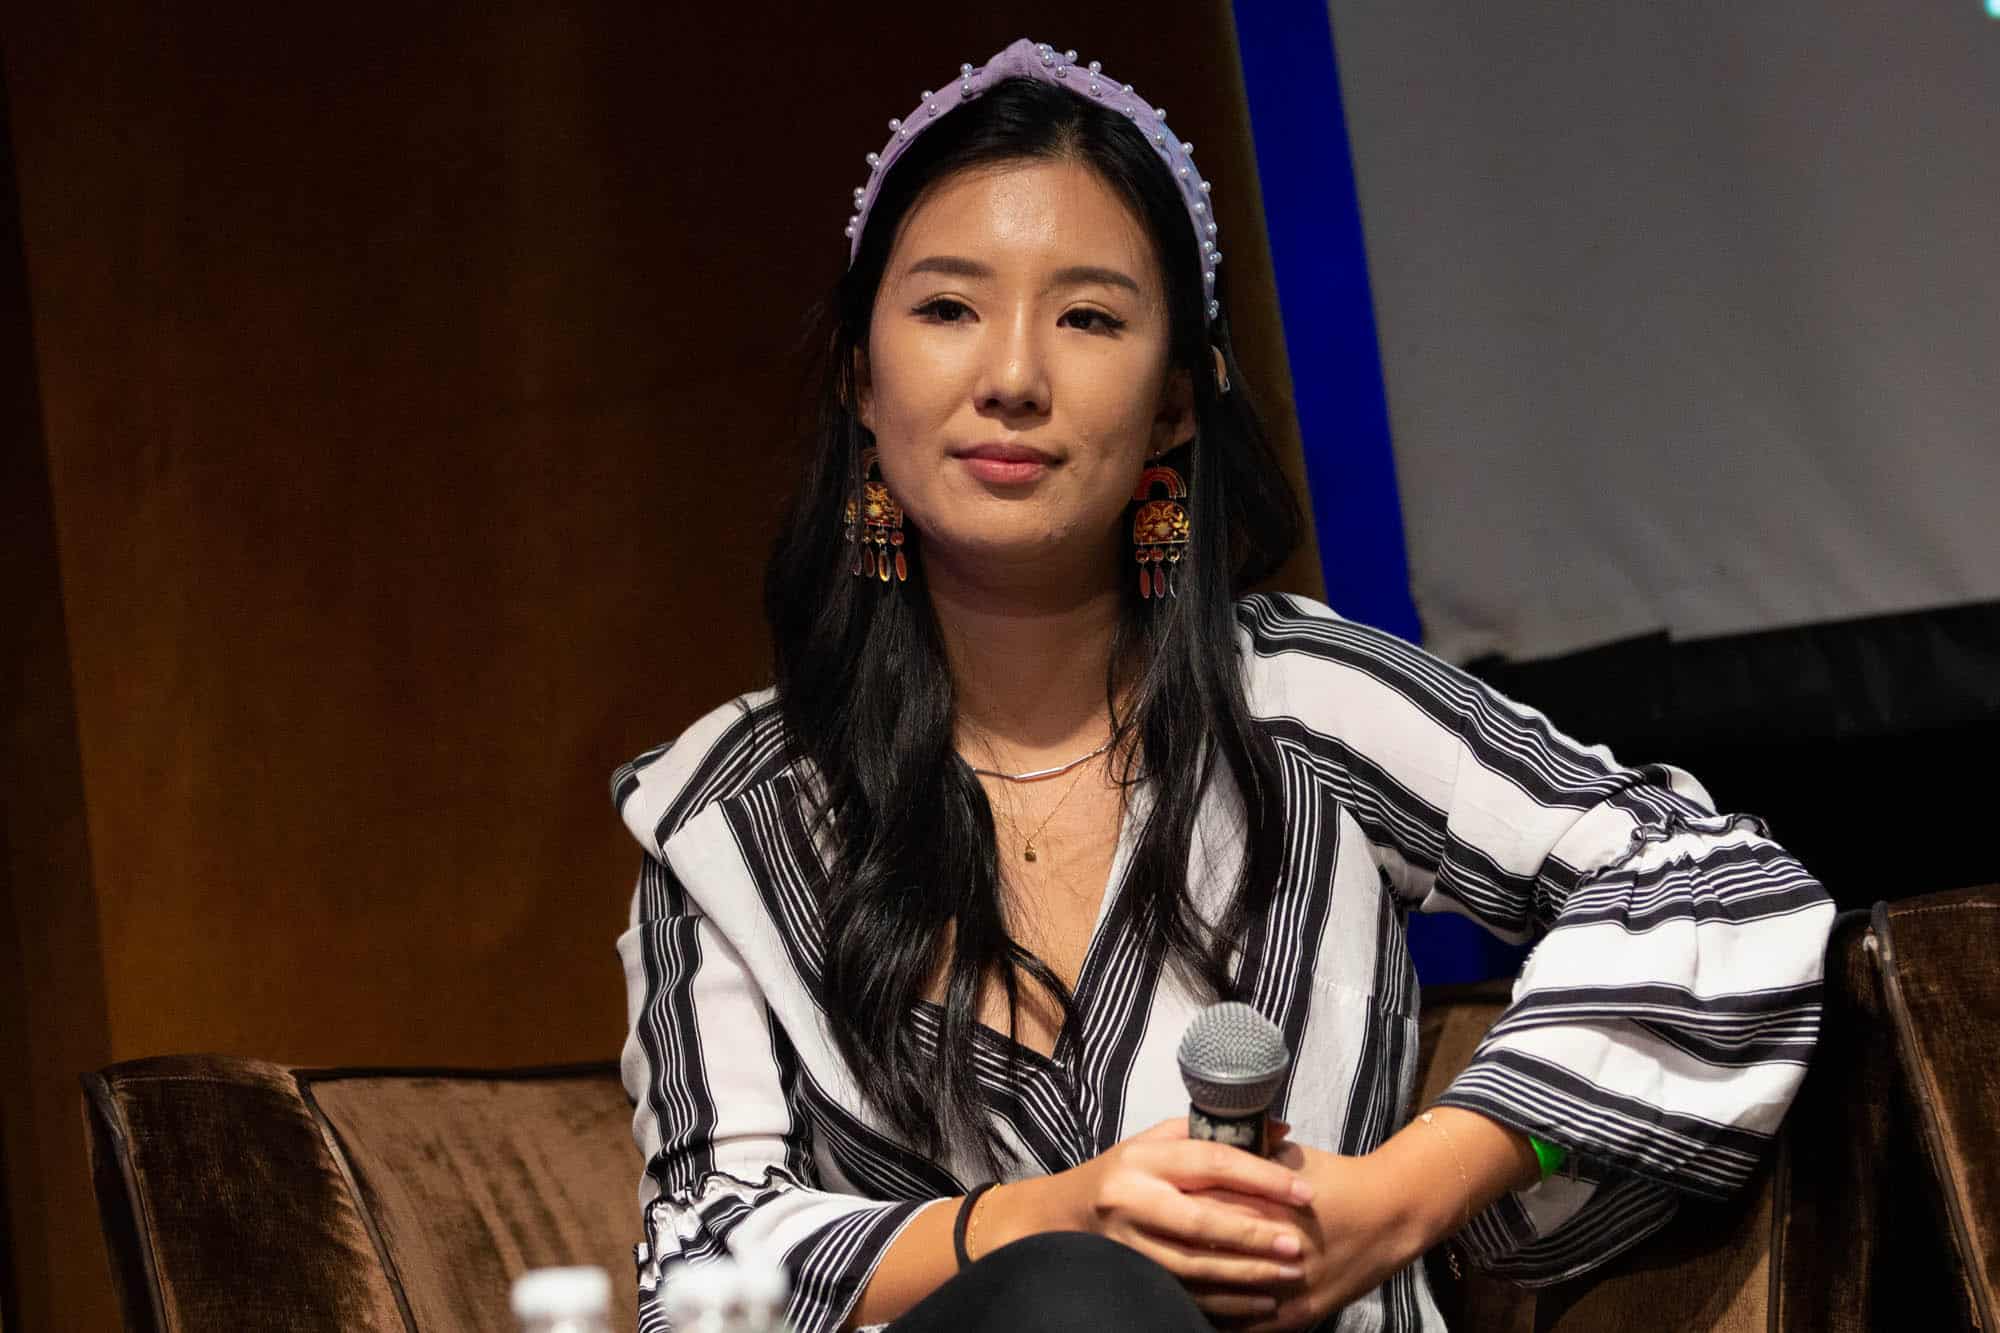 Lily Wu, co-founder of Pixies World